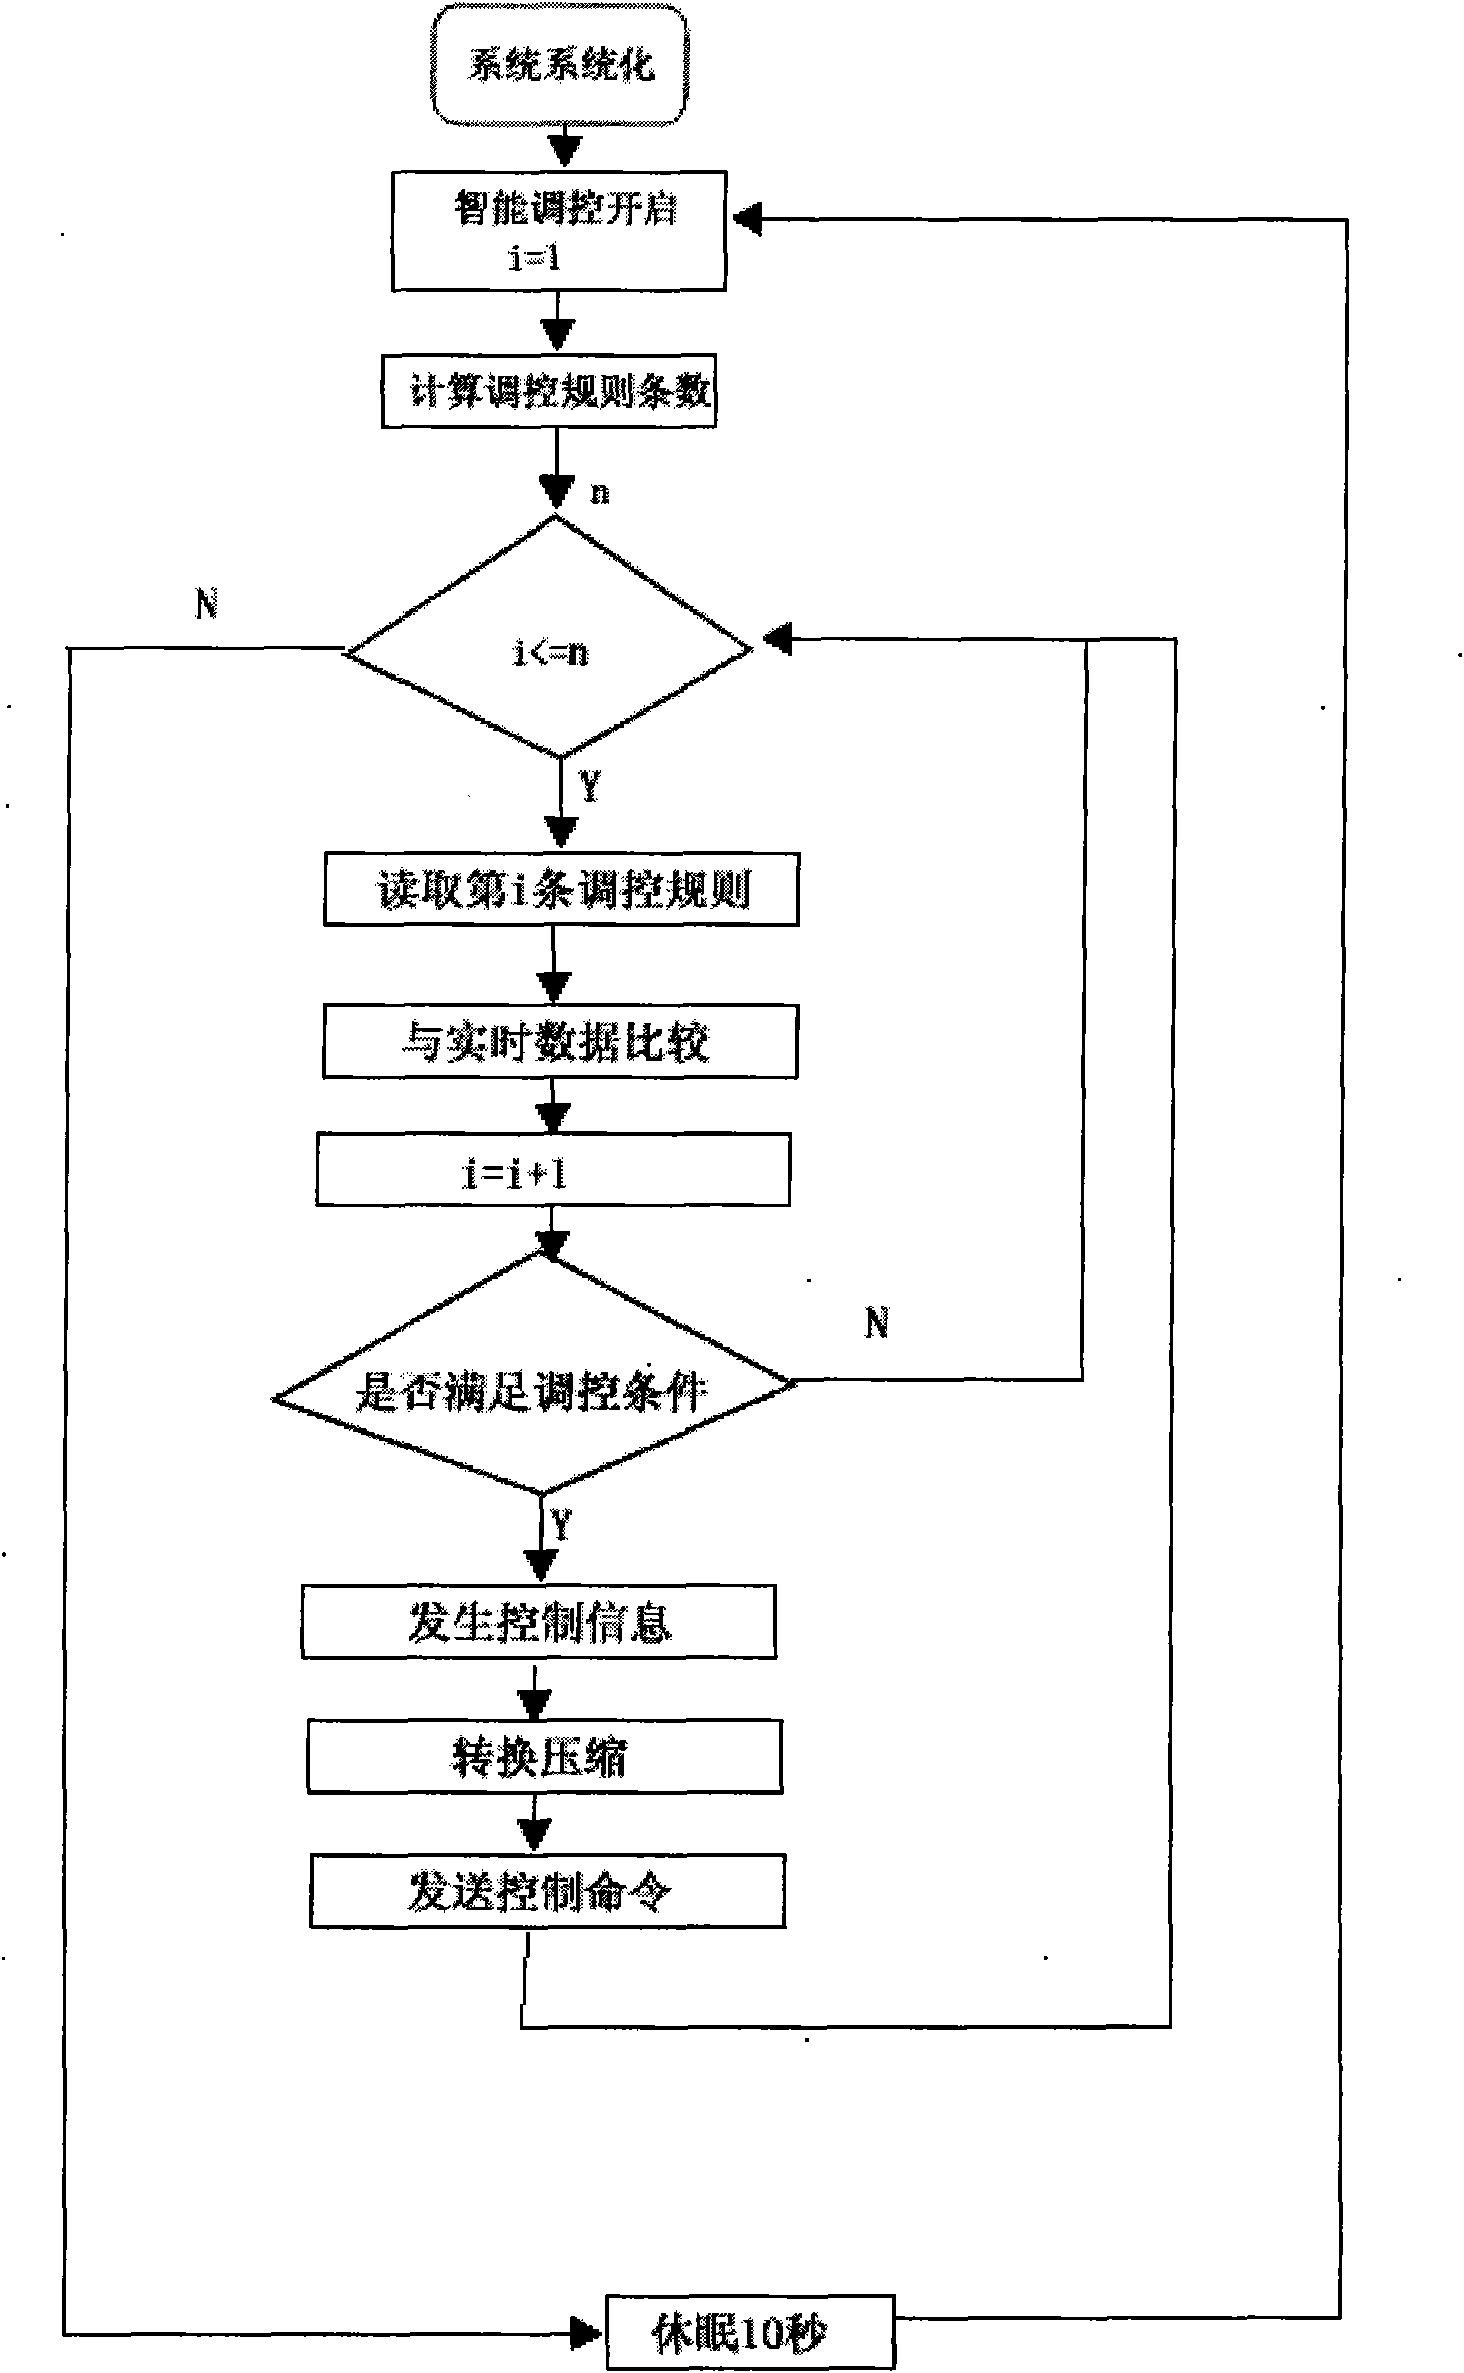 Remote agricultural information intelligent analysis system and agricultural environment regulation and control method